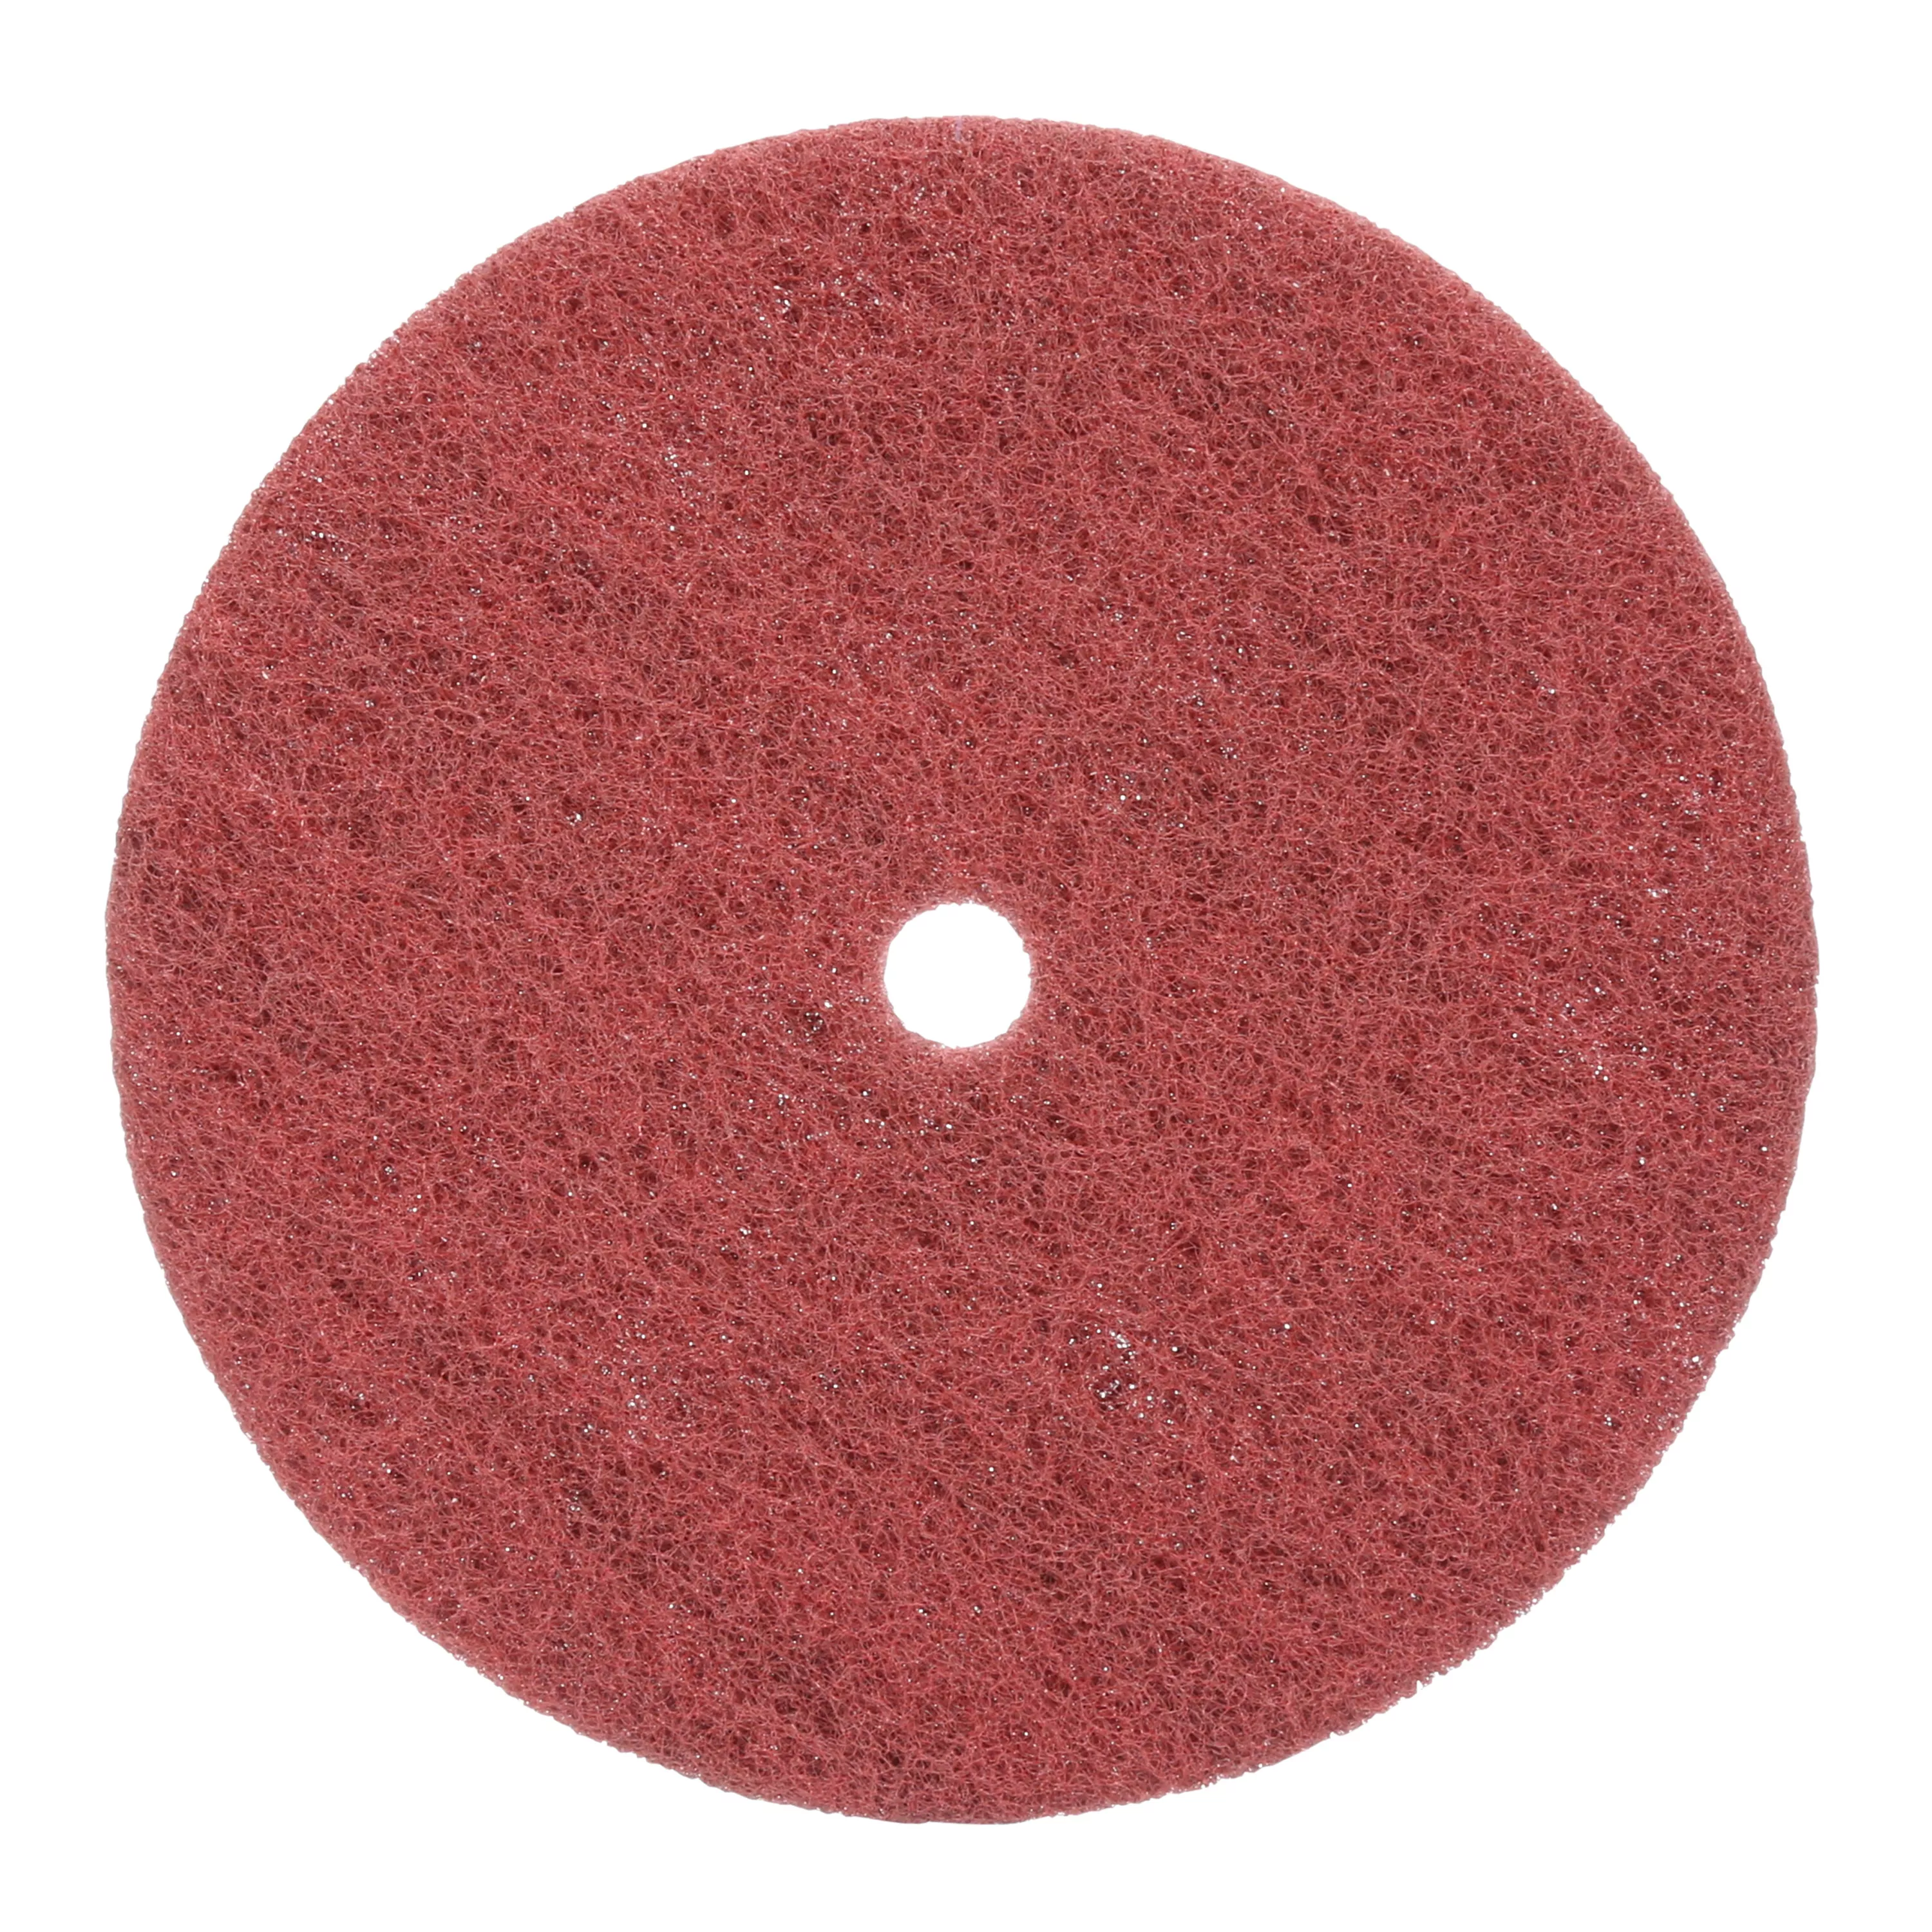 Standard Abrasives™ Buff and Blend HS Disc, 860708, 6 in x 1/2 in A VFN,
10/Pac, 100 ea/Case